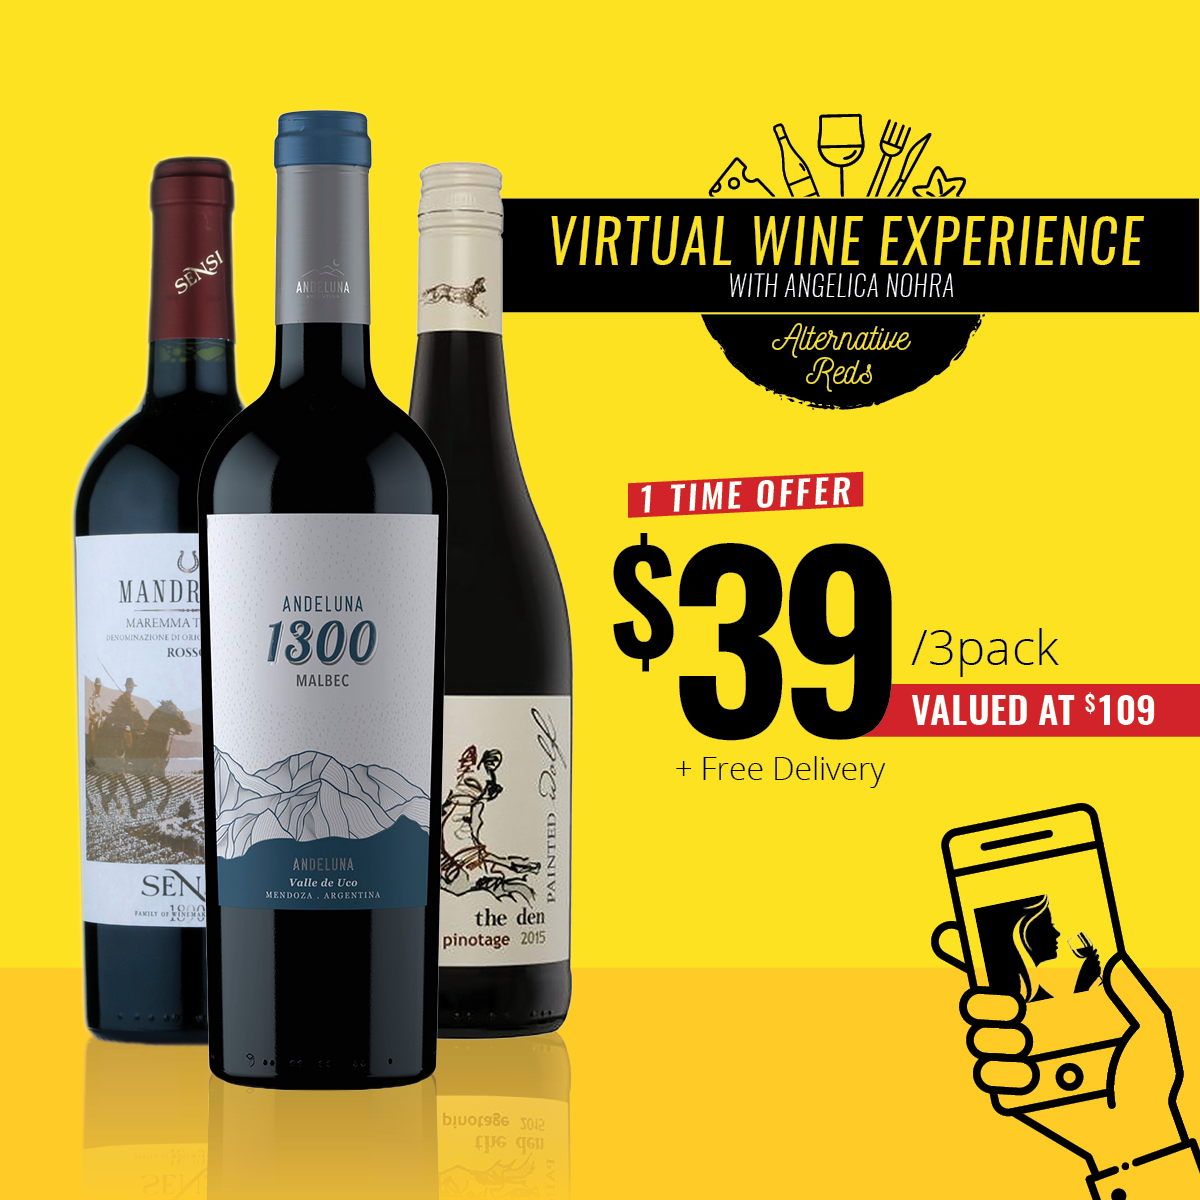 Virtual Wine Experience - Alternative Reds (One Time Offer)